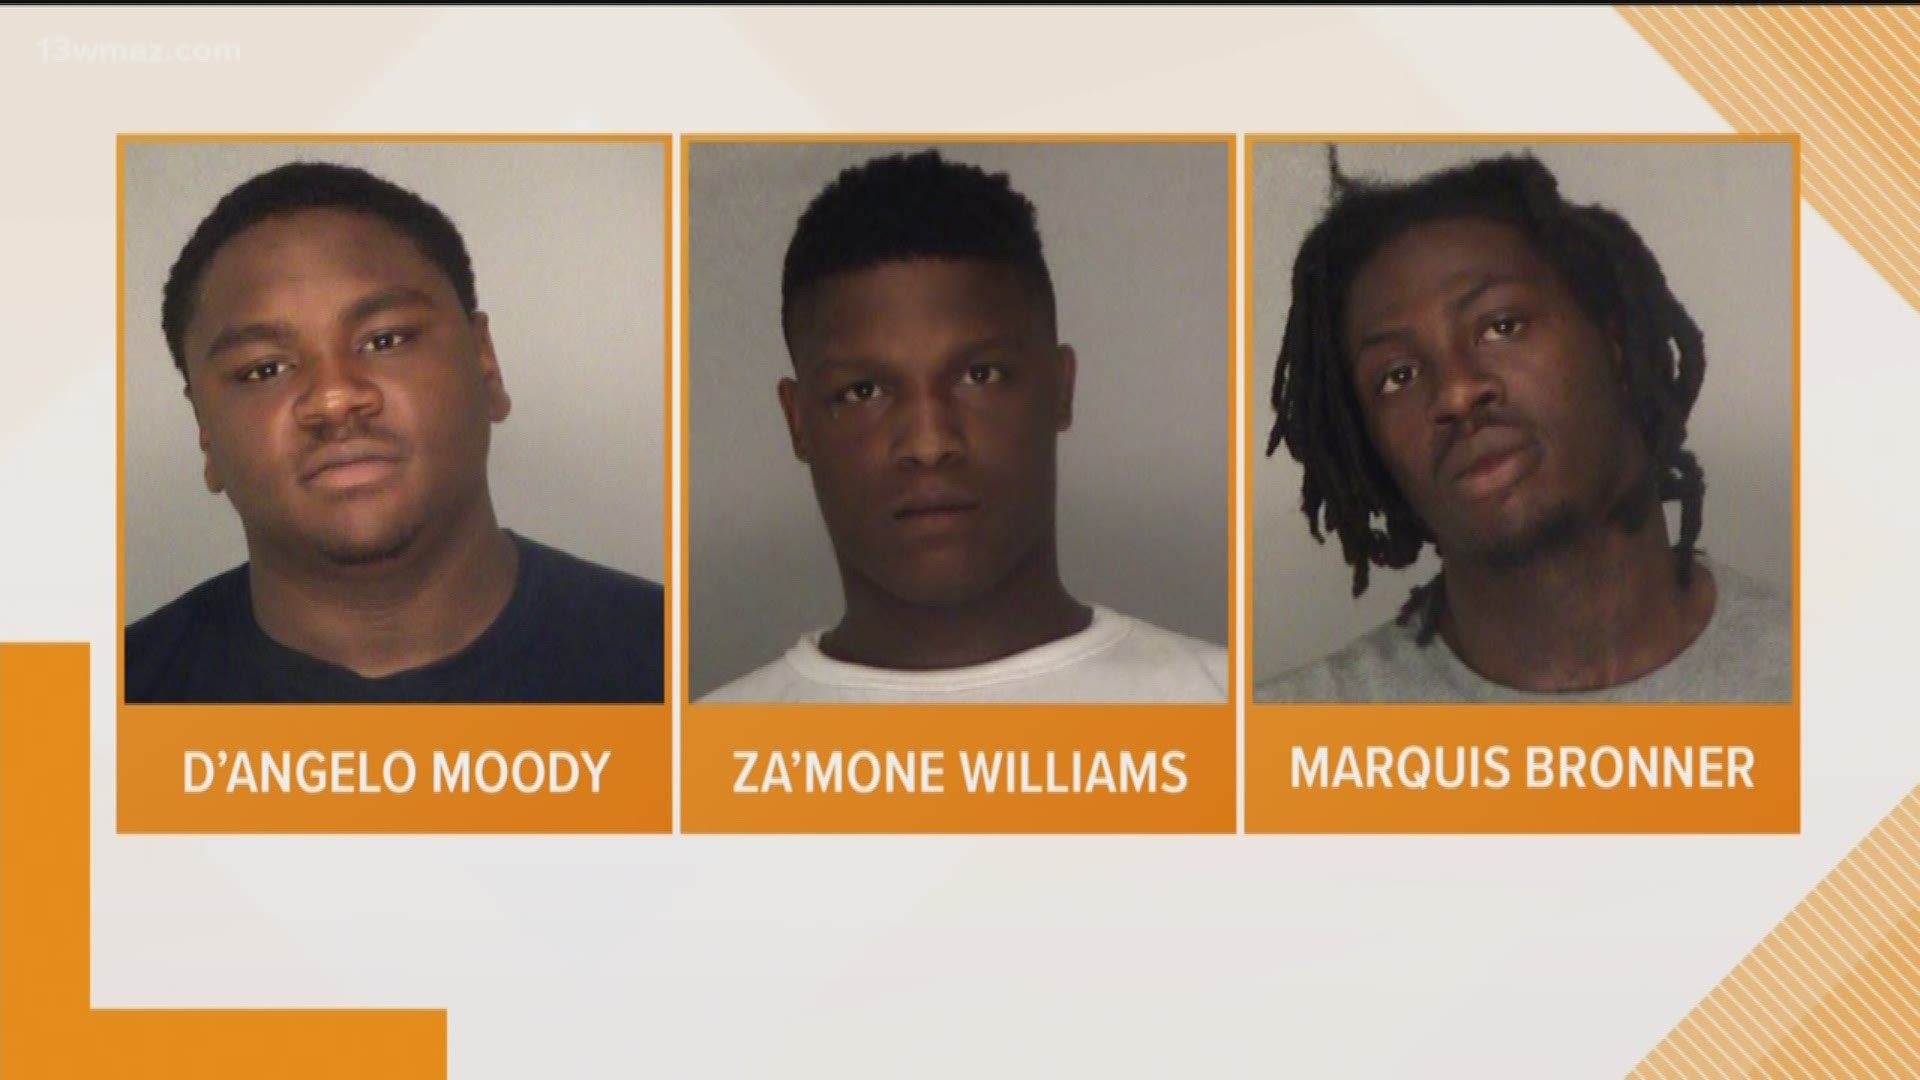 Bibb deputies arrested three men accused of shoplifting items from the Kohl's store located at 6275 Zebulon Road. All three are in the Bibb County Jail charged with felony shoplifting.